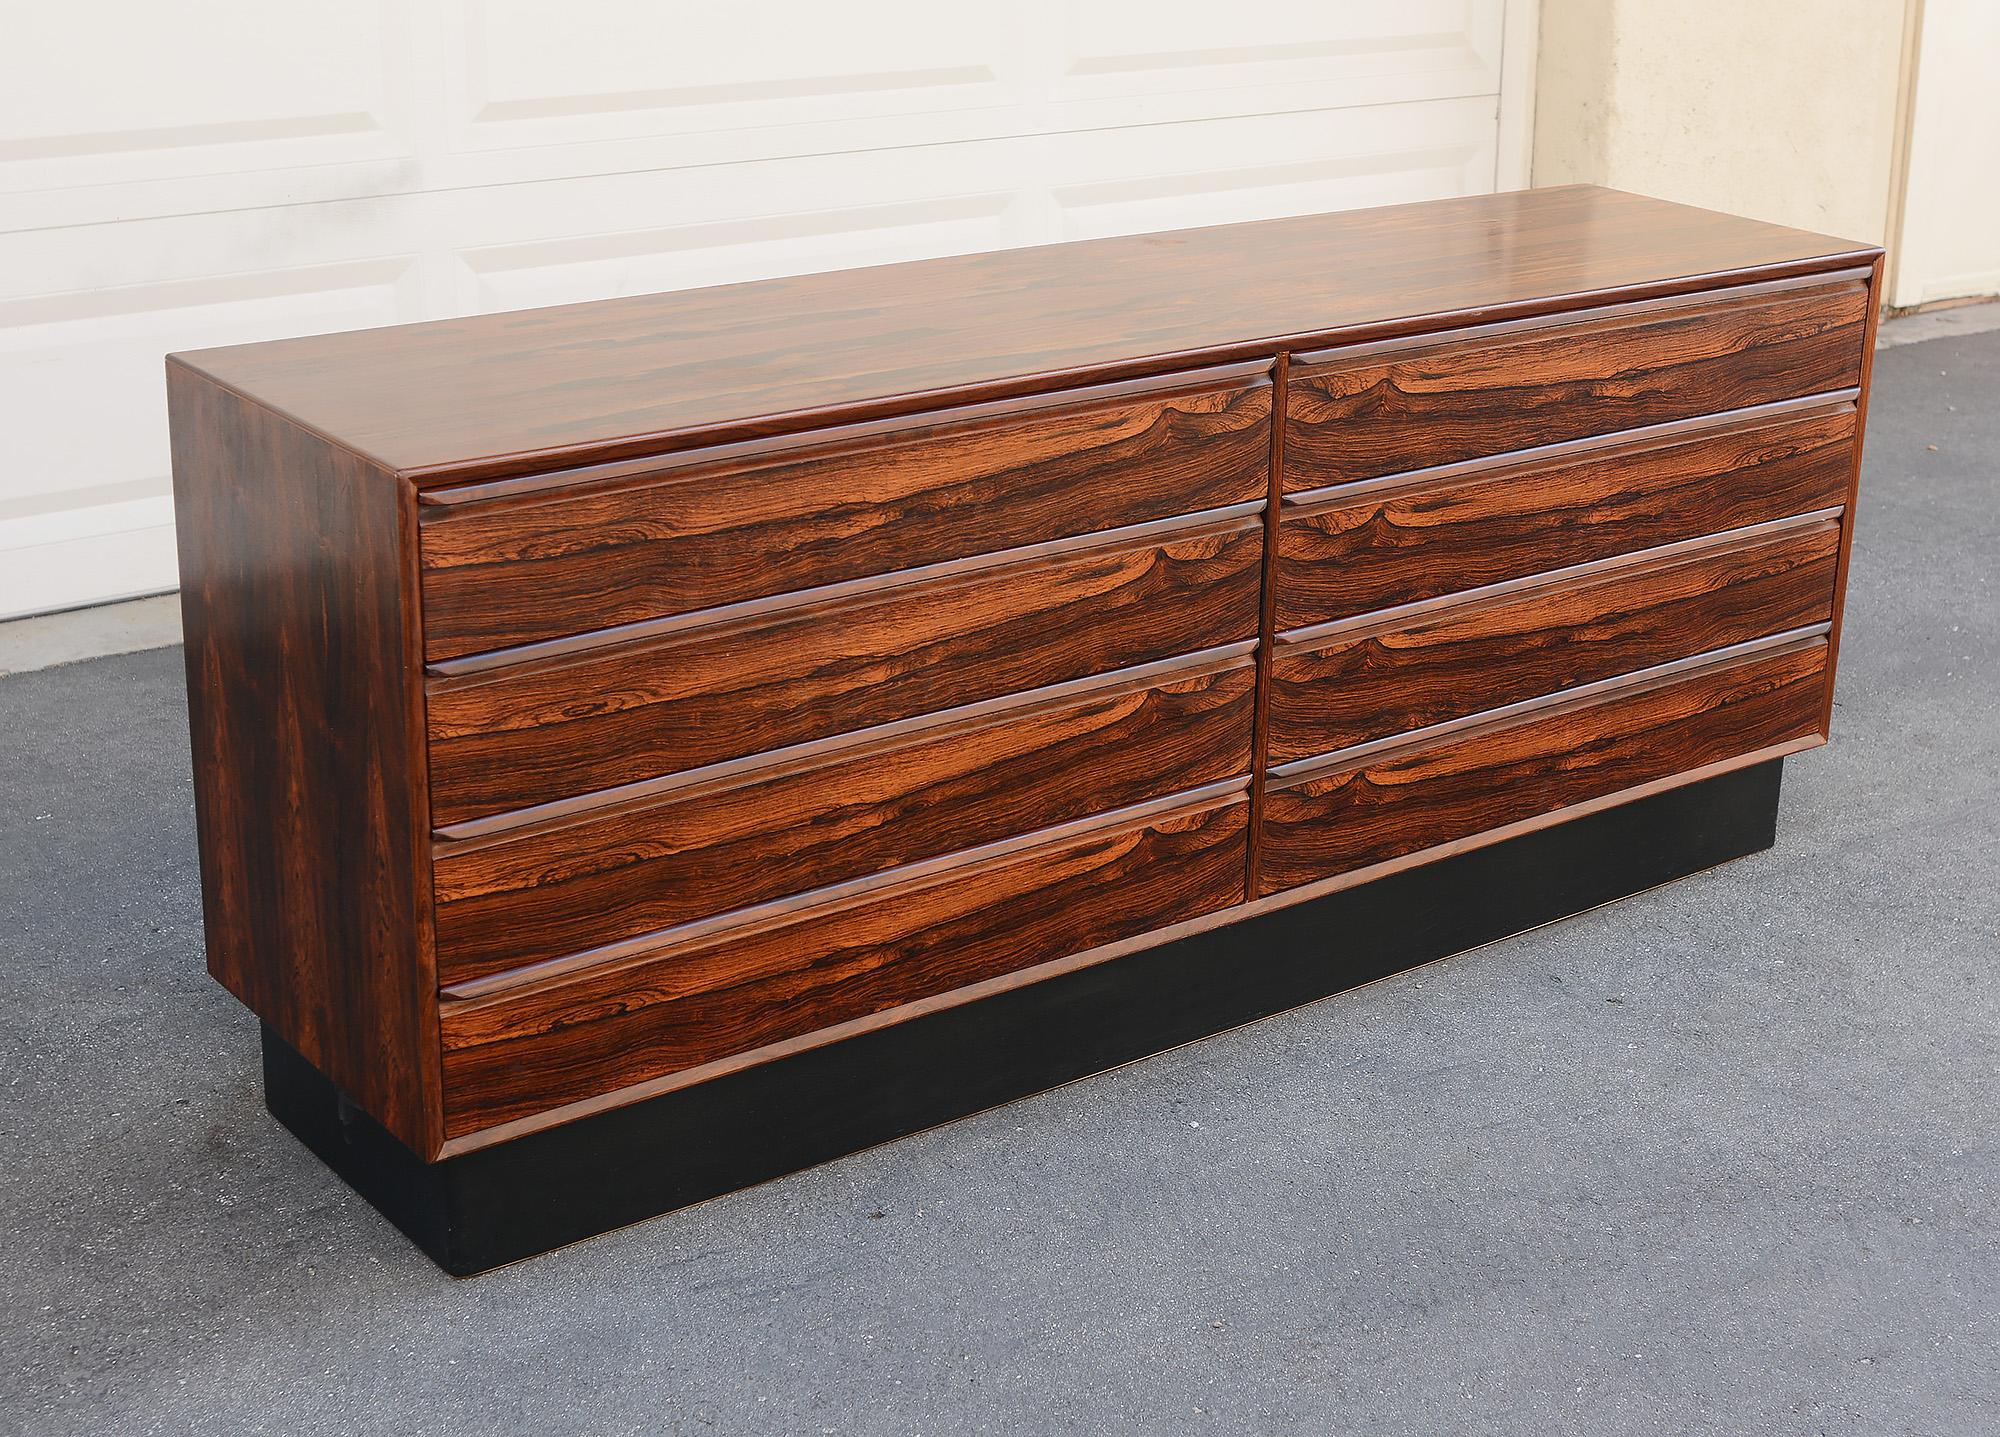 Eight drawer dresser by Westnofa of Norway. This dresser is in highly figured Brazilian rosewood. The inside of the drawers are mahogany. The plinth base is wrapped in Naugahyde. The top of the dresser shows some wear. There are a few areas with